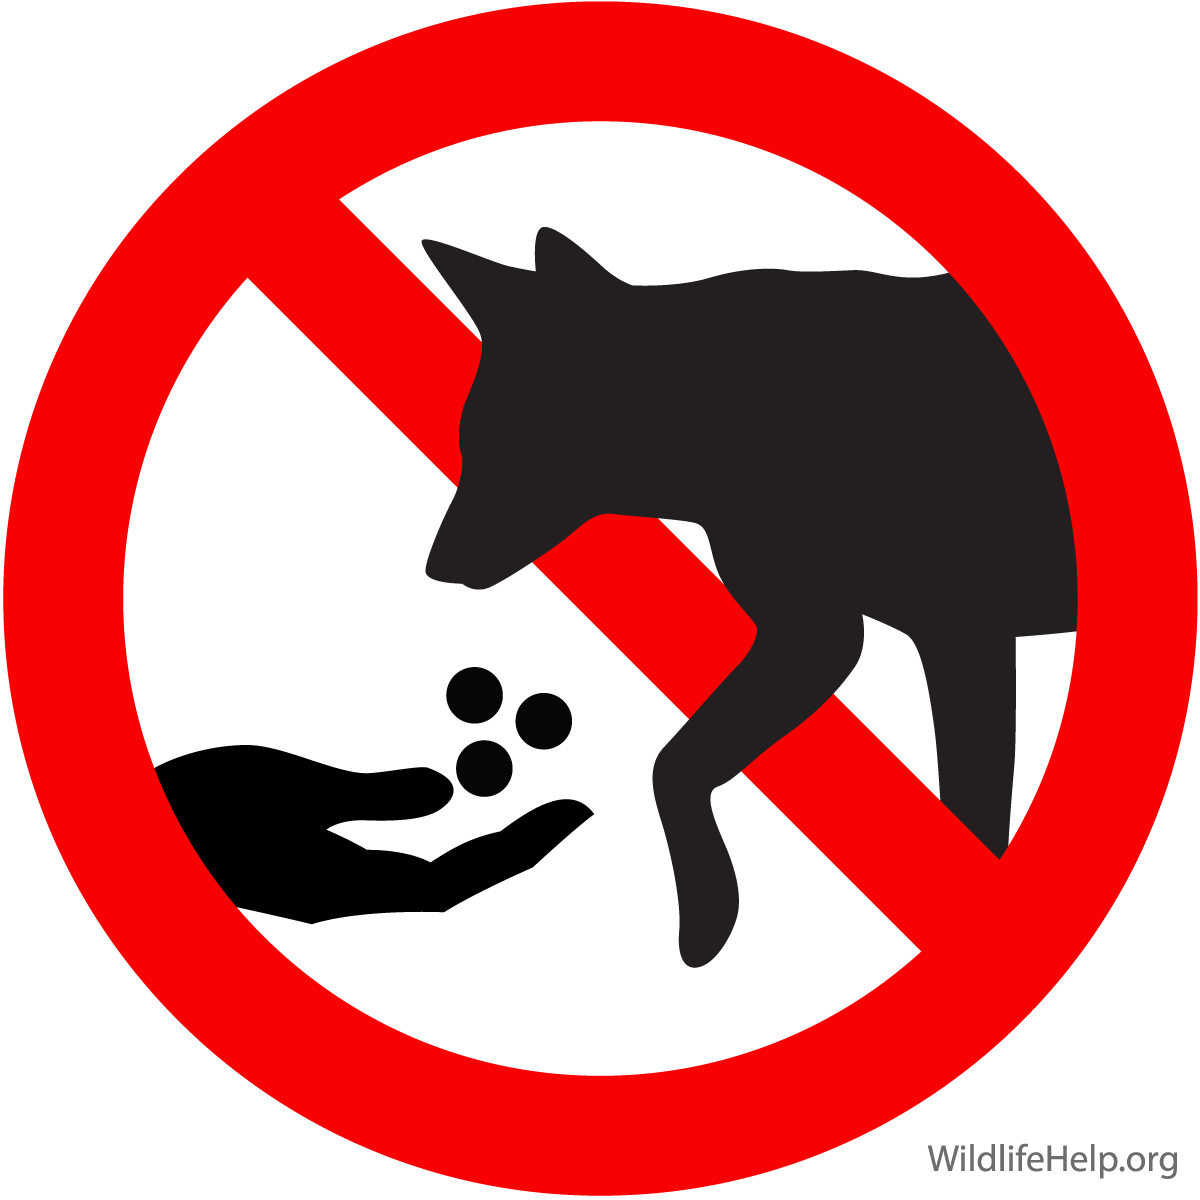 Do Not Feed Coyotes graphic illustration